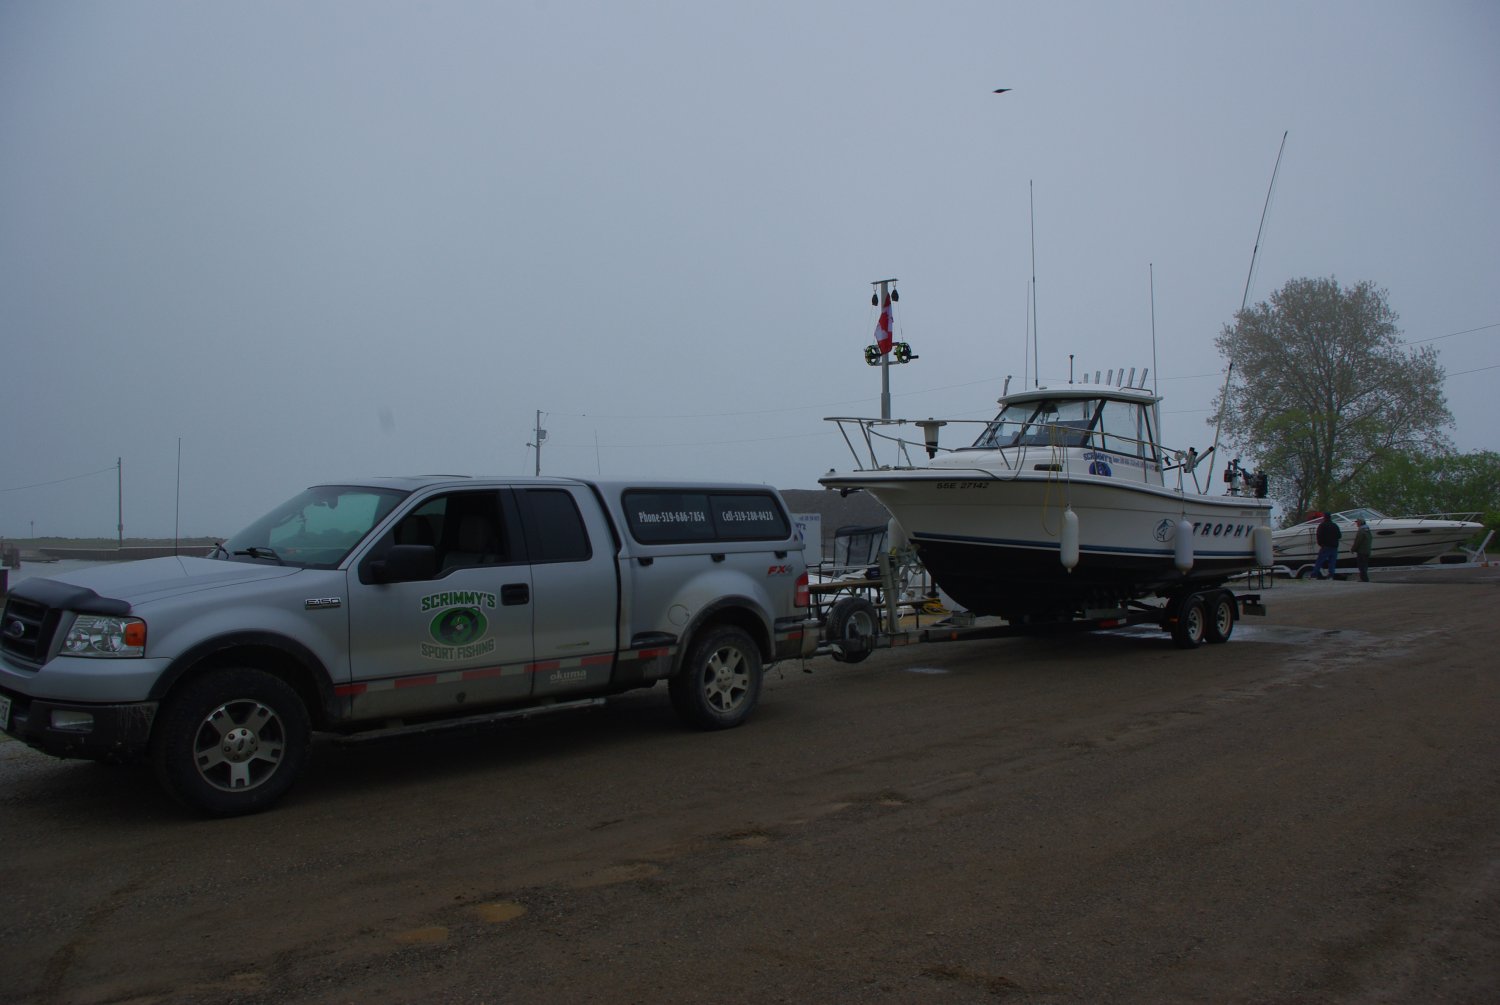 charter boat and truck.JPG